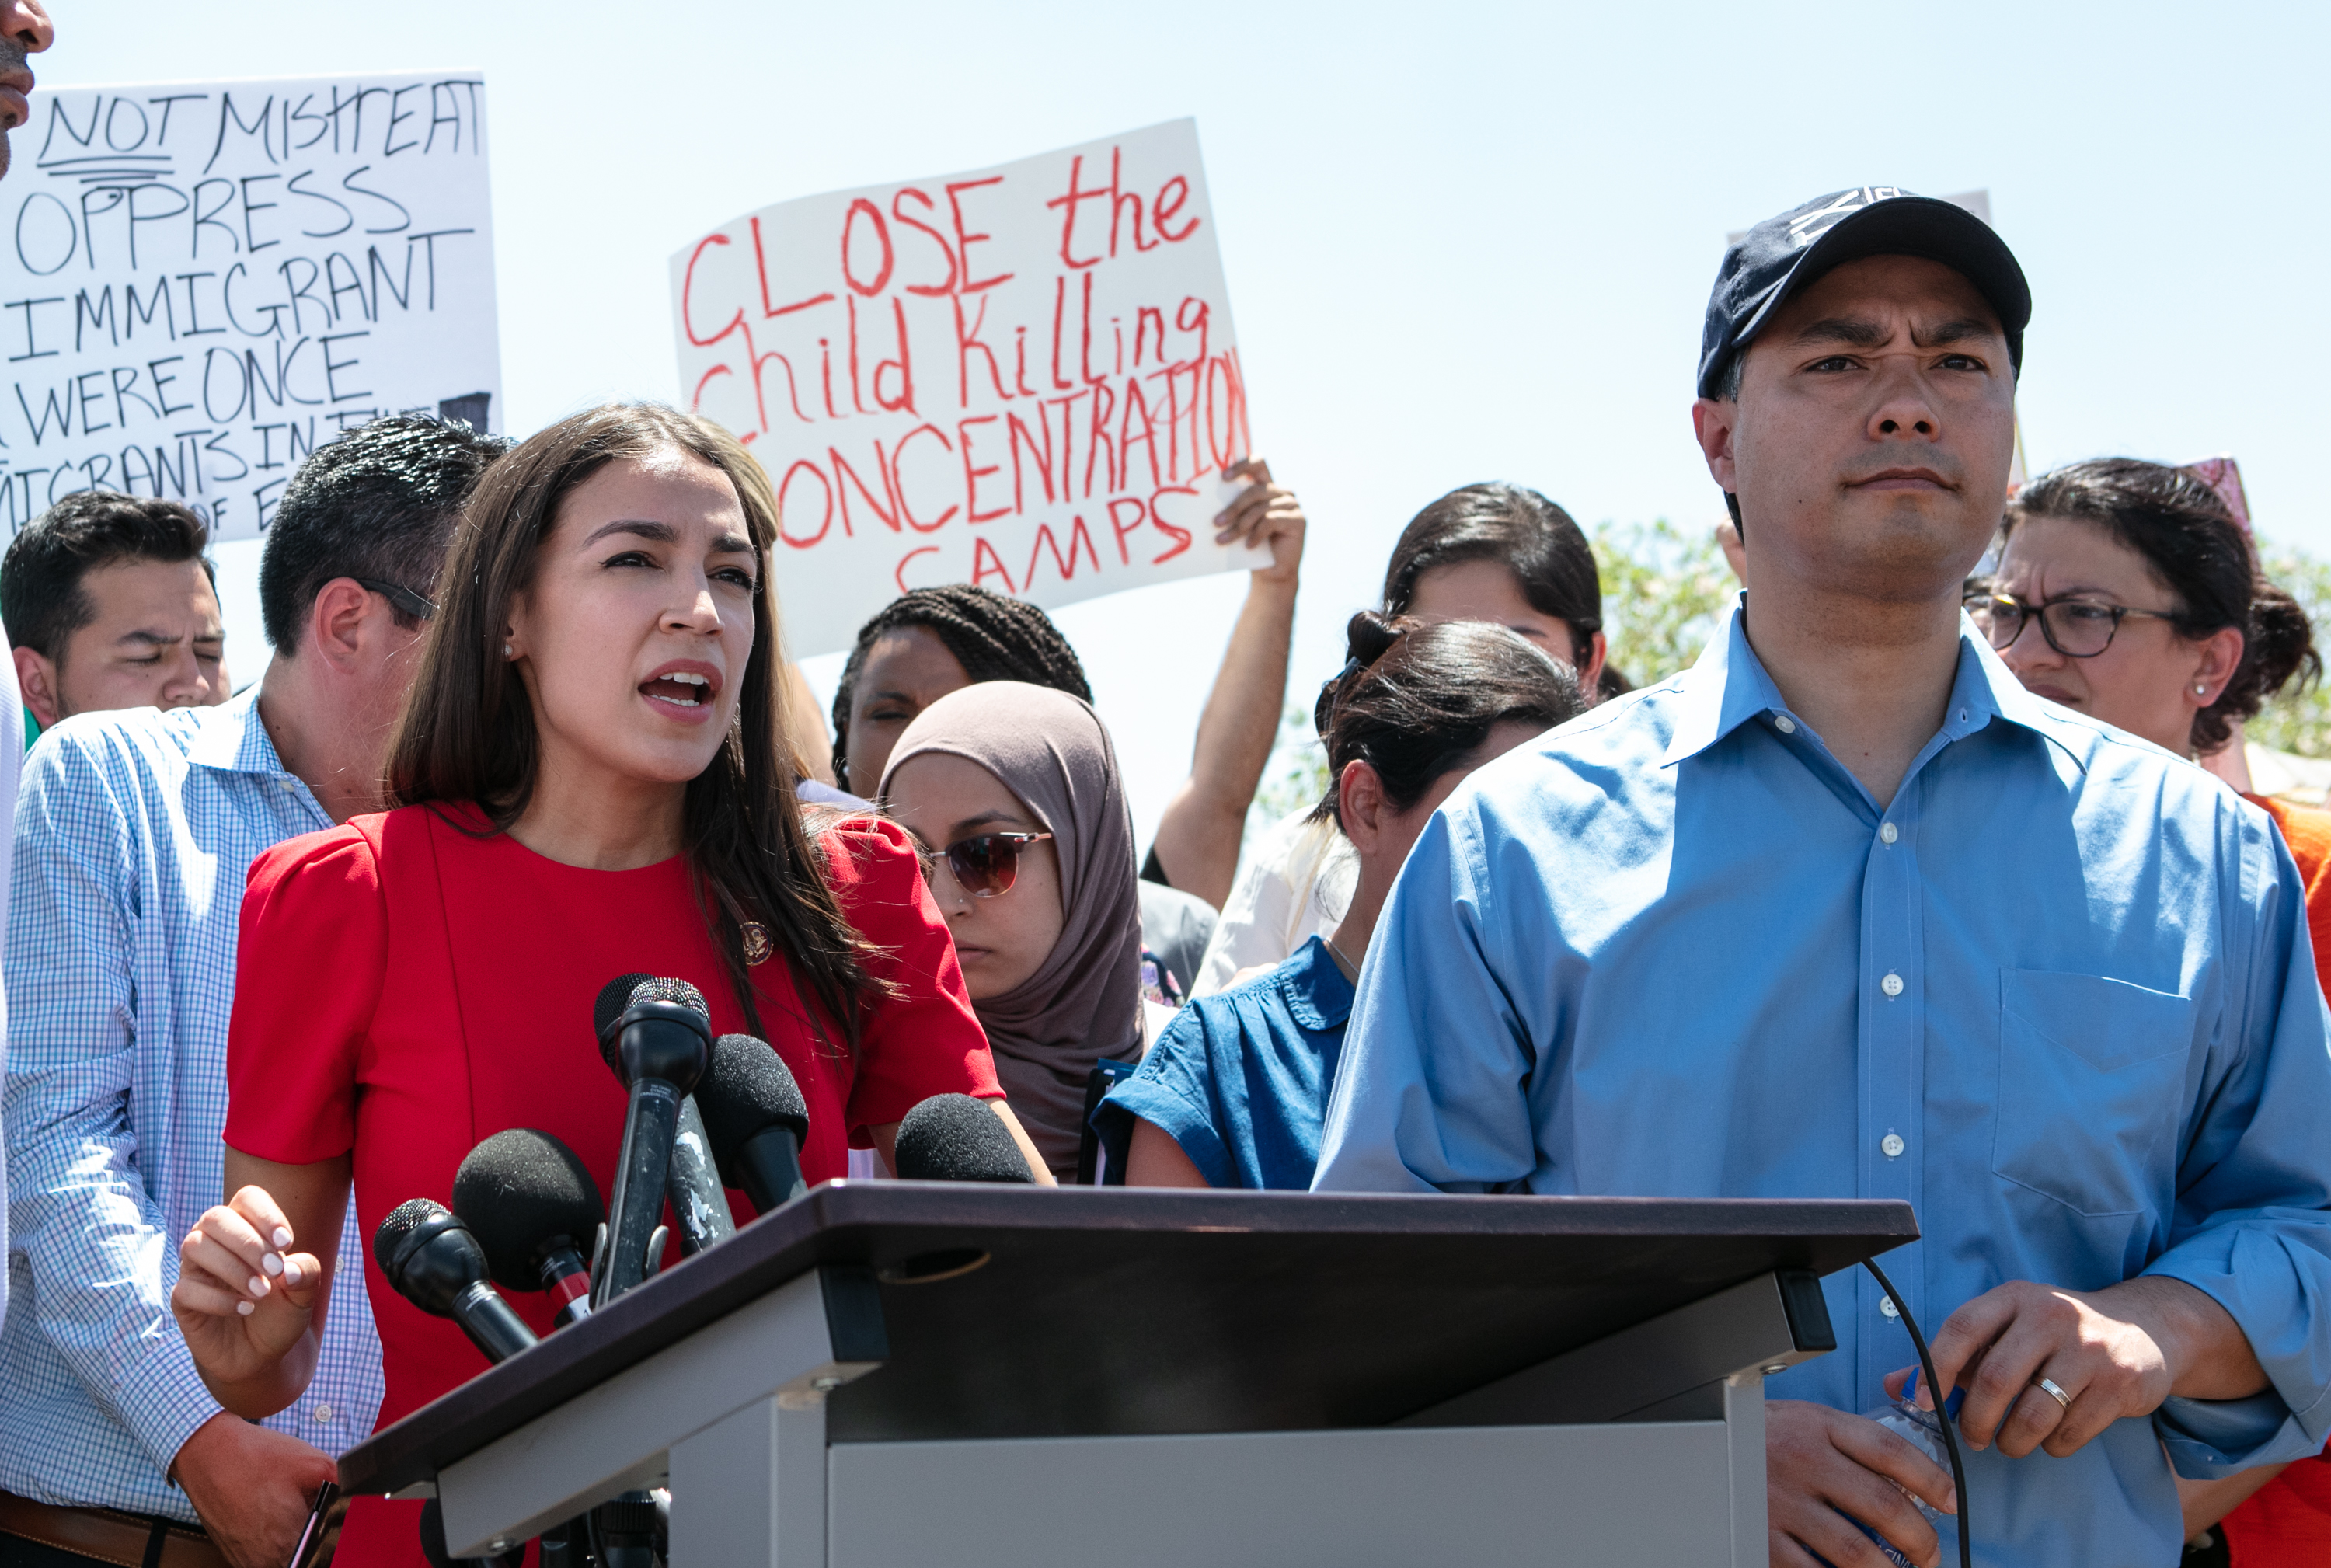 Rep. Alexandria Ocasio-Cortez (D-NY) addresses the media after touring a Border Patrol facility housing children on July 1, 2019 in Clint, Texas.